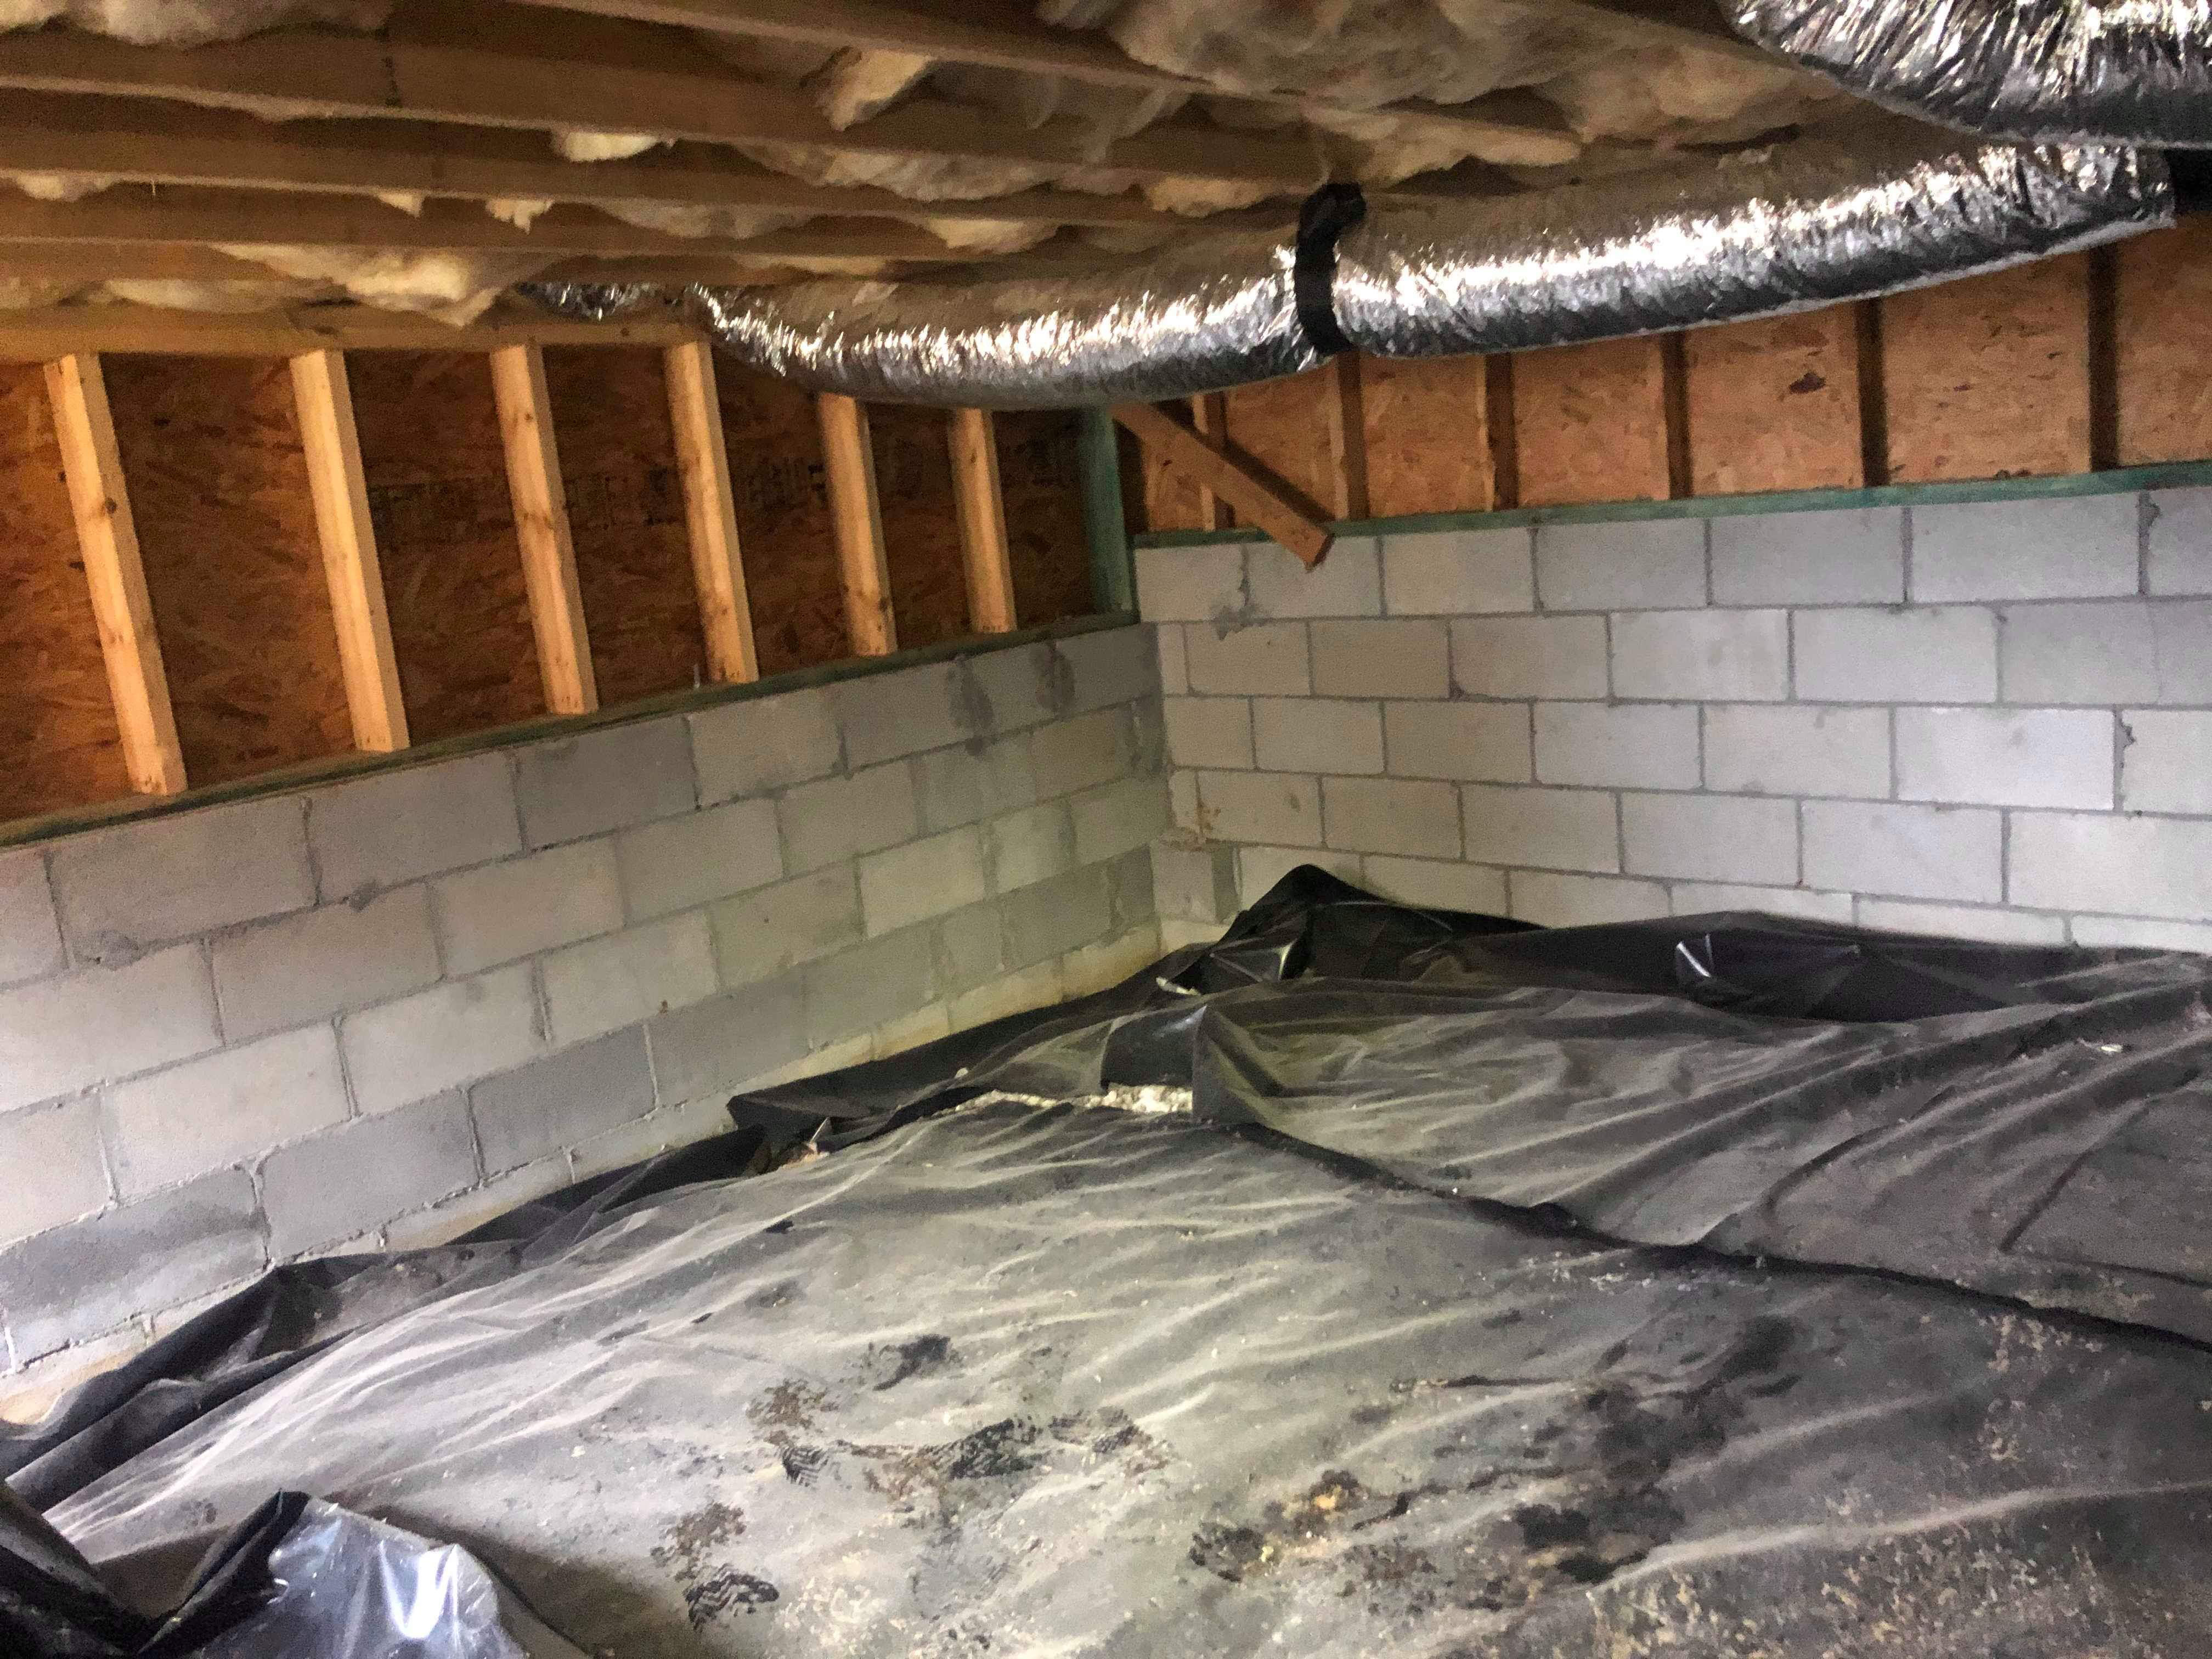 Crawl space before renovation